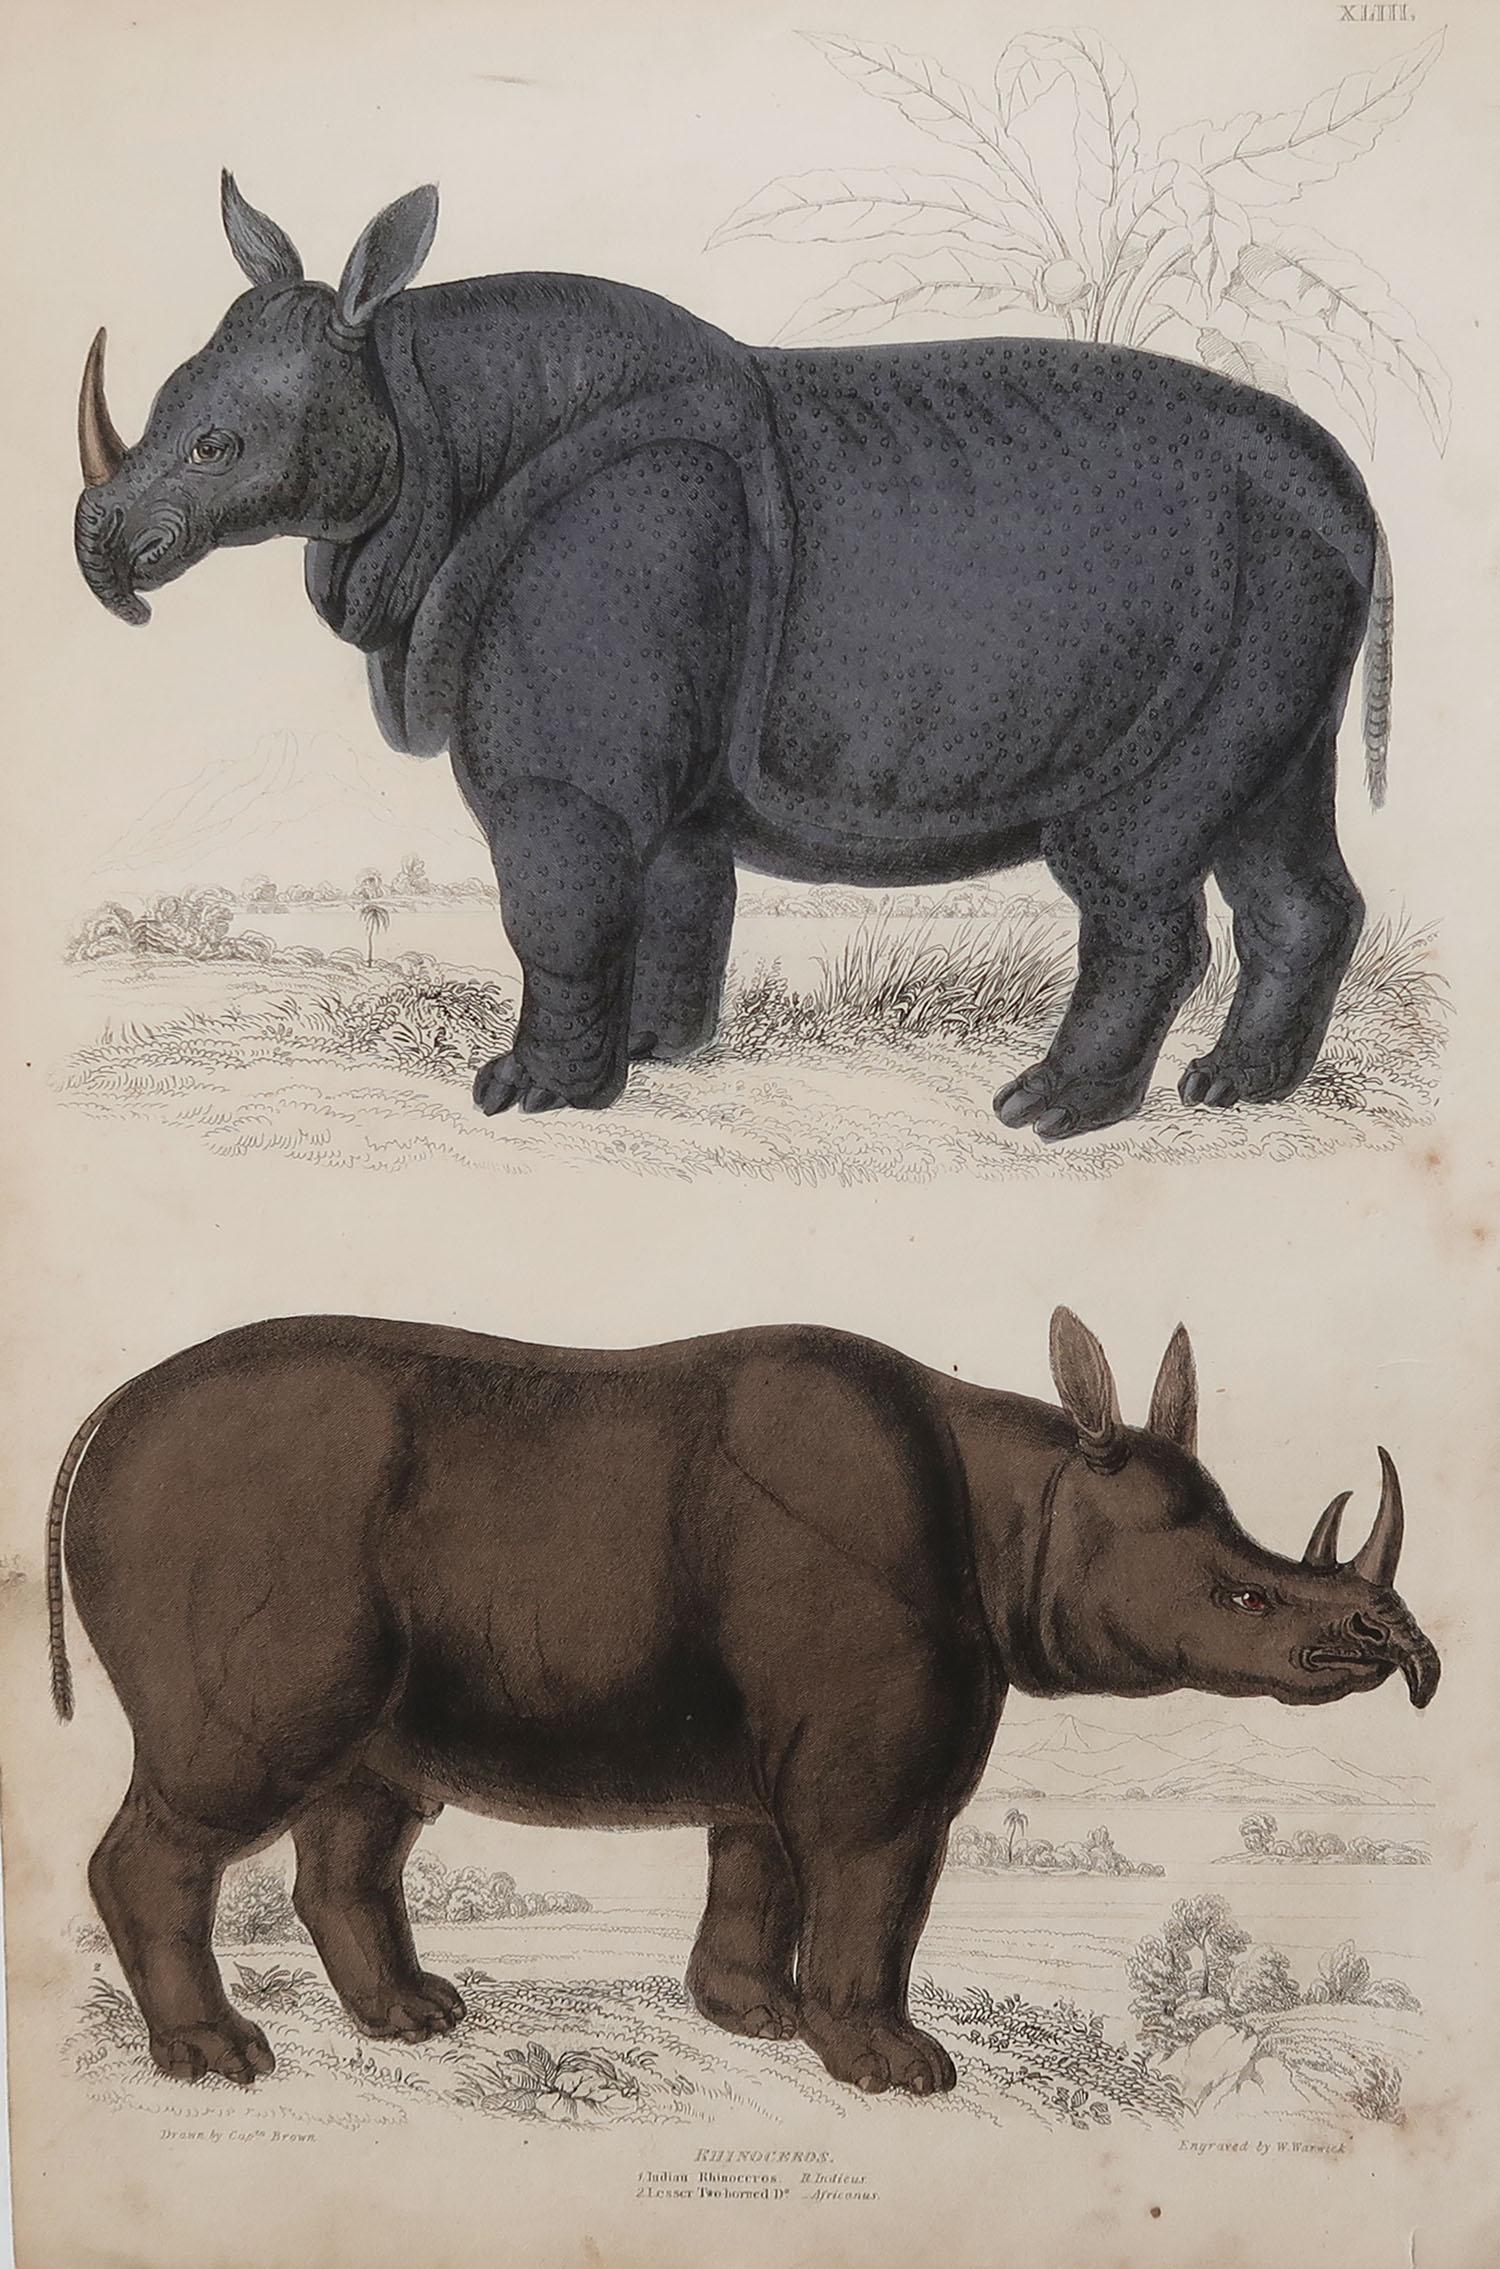 Great image of an Indian and a lesser two horn rhino

Unframed. It gives you the option of perhaps making a set up using your own choice of frames.

Lithograph after Cpt. brown with original hand color.

Published, circa 1835

Free